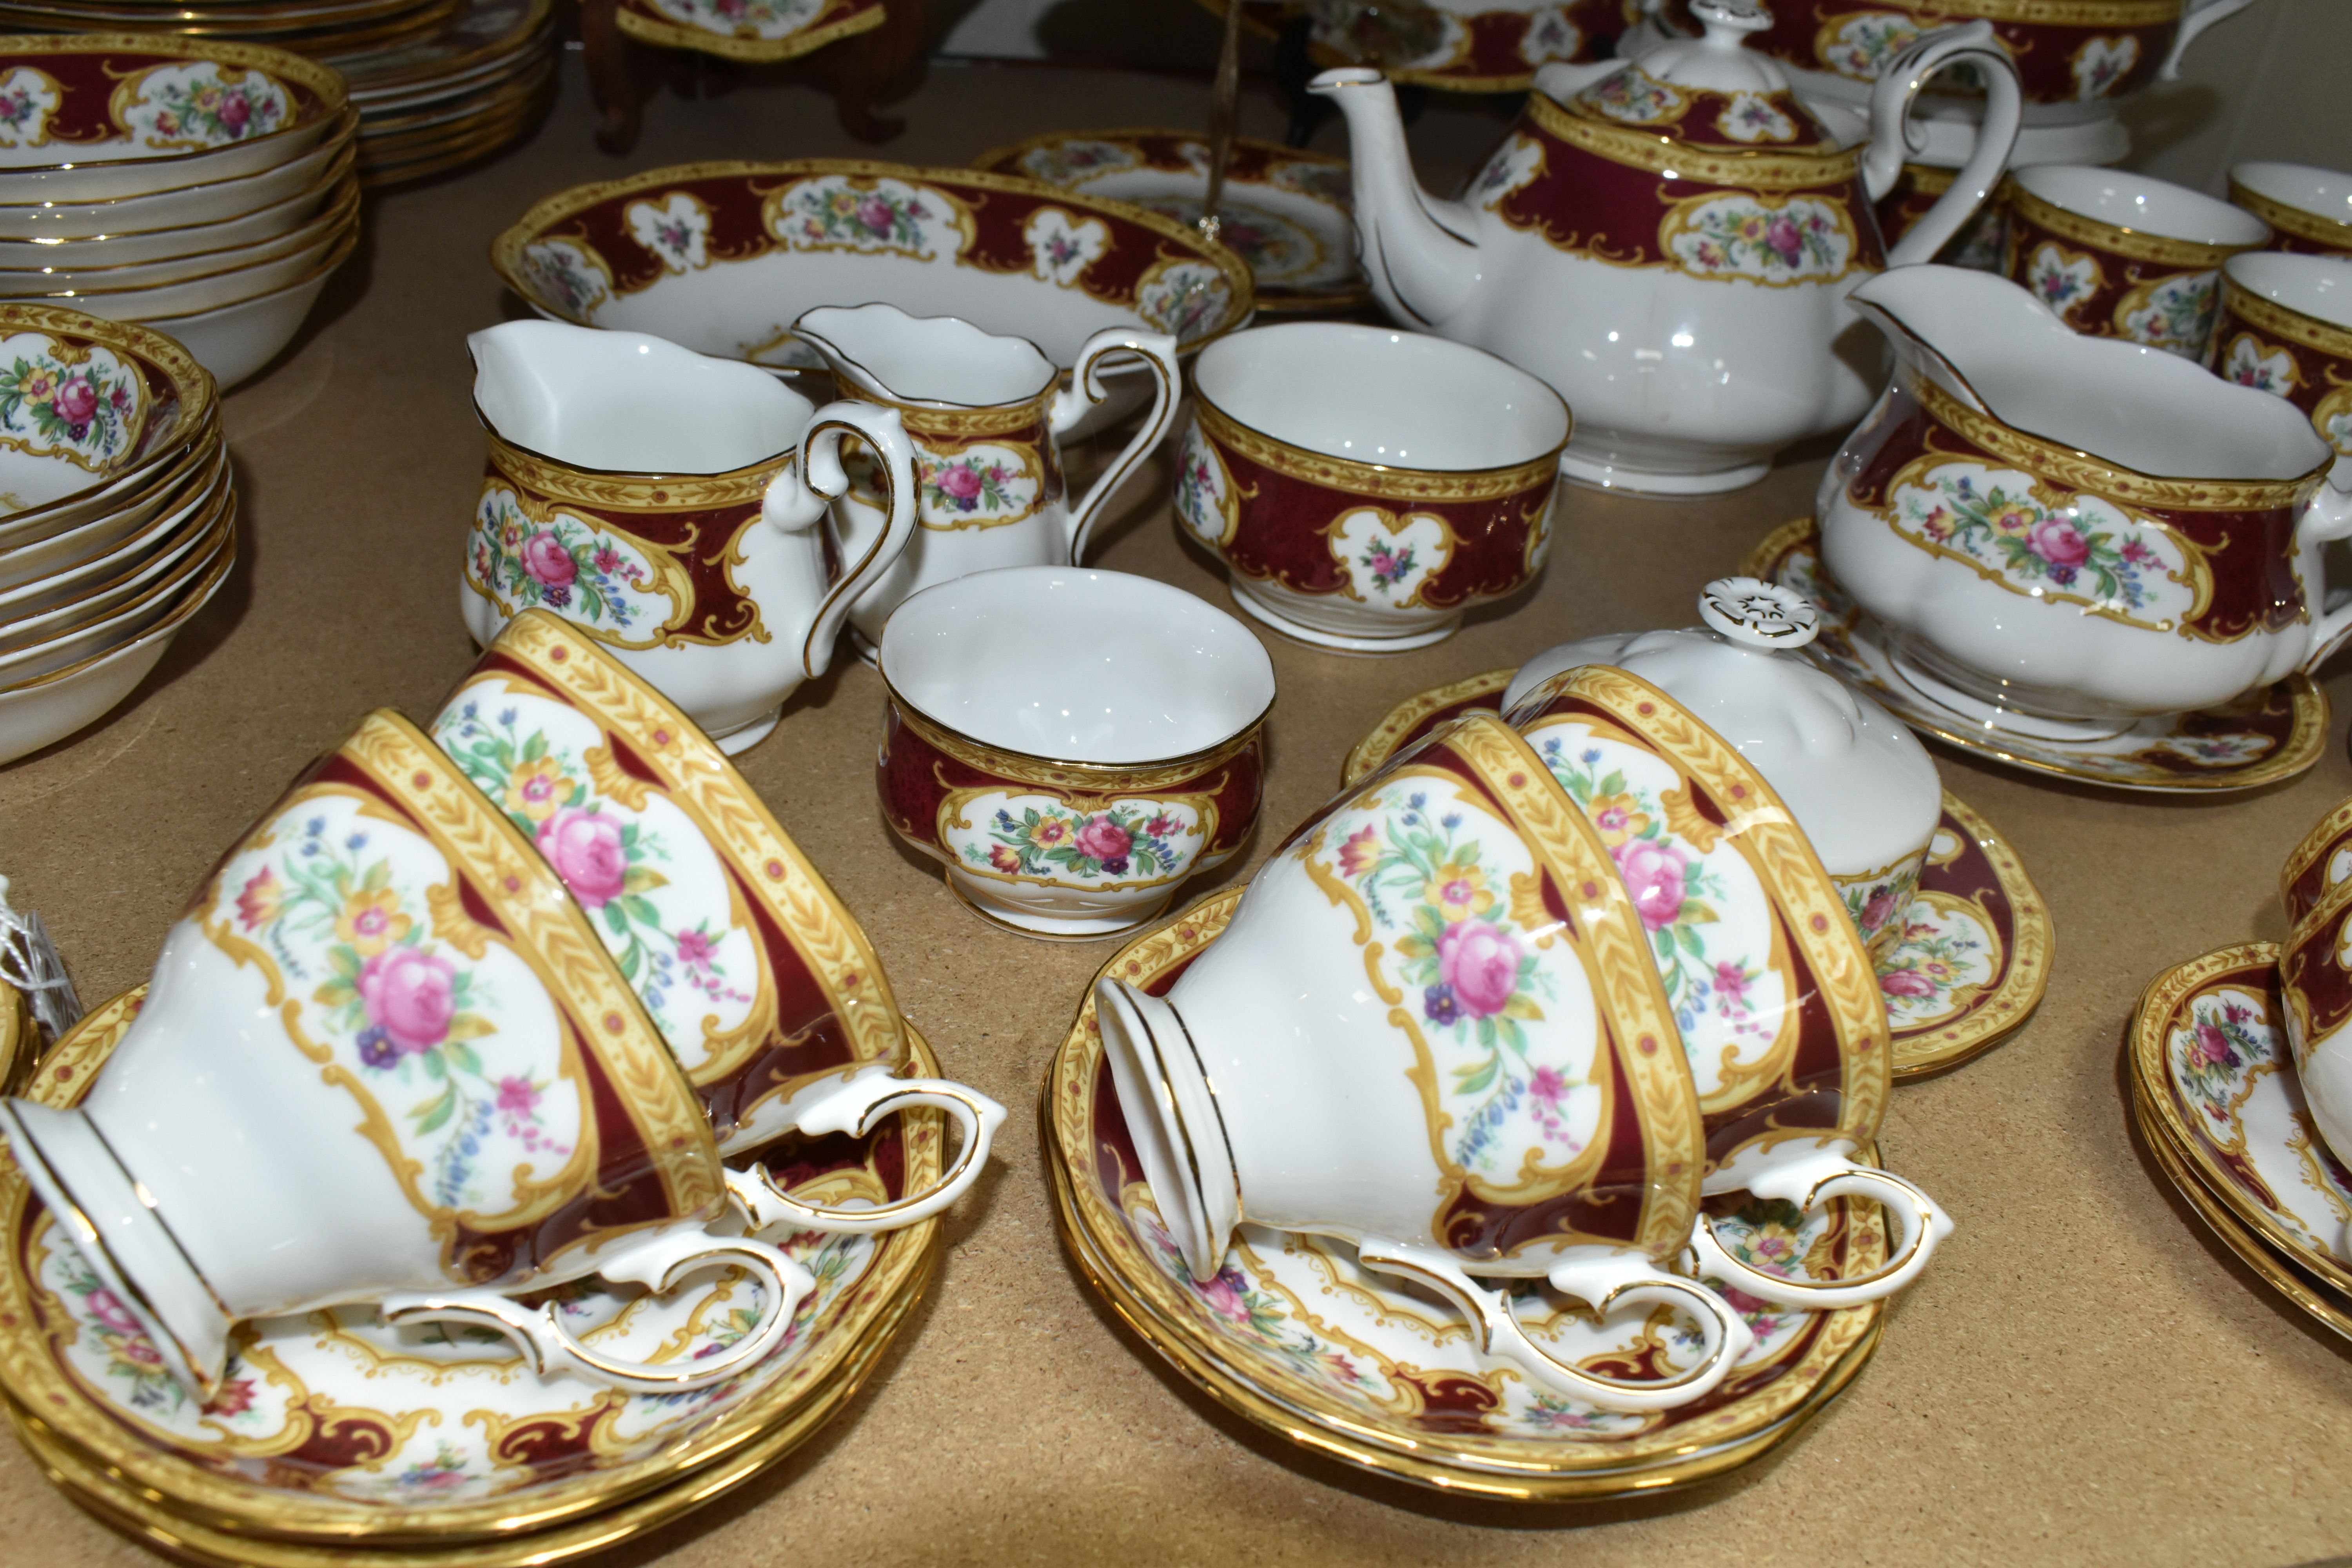 A SEVENTY EIGHT PIECE ROYAL ALBERT 'LADY HAMILTON' DINNER SERVICE, comprising a meat plate, two - Image 7 of 8